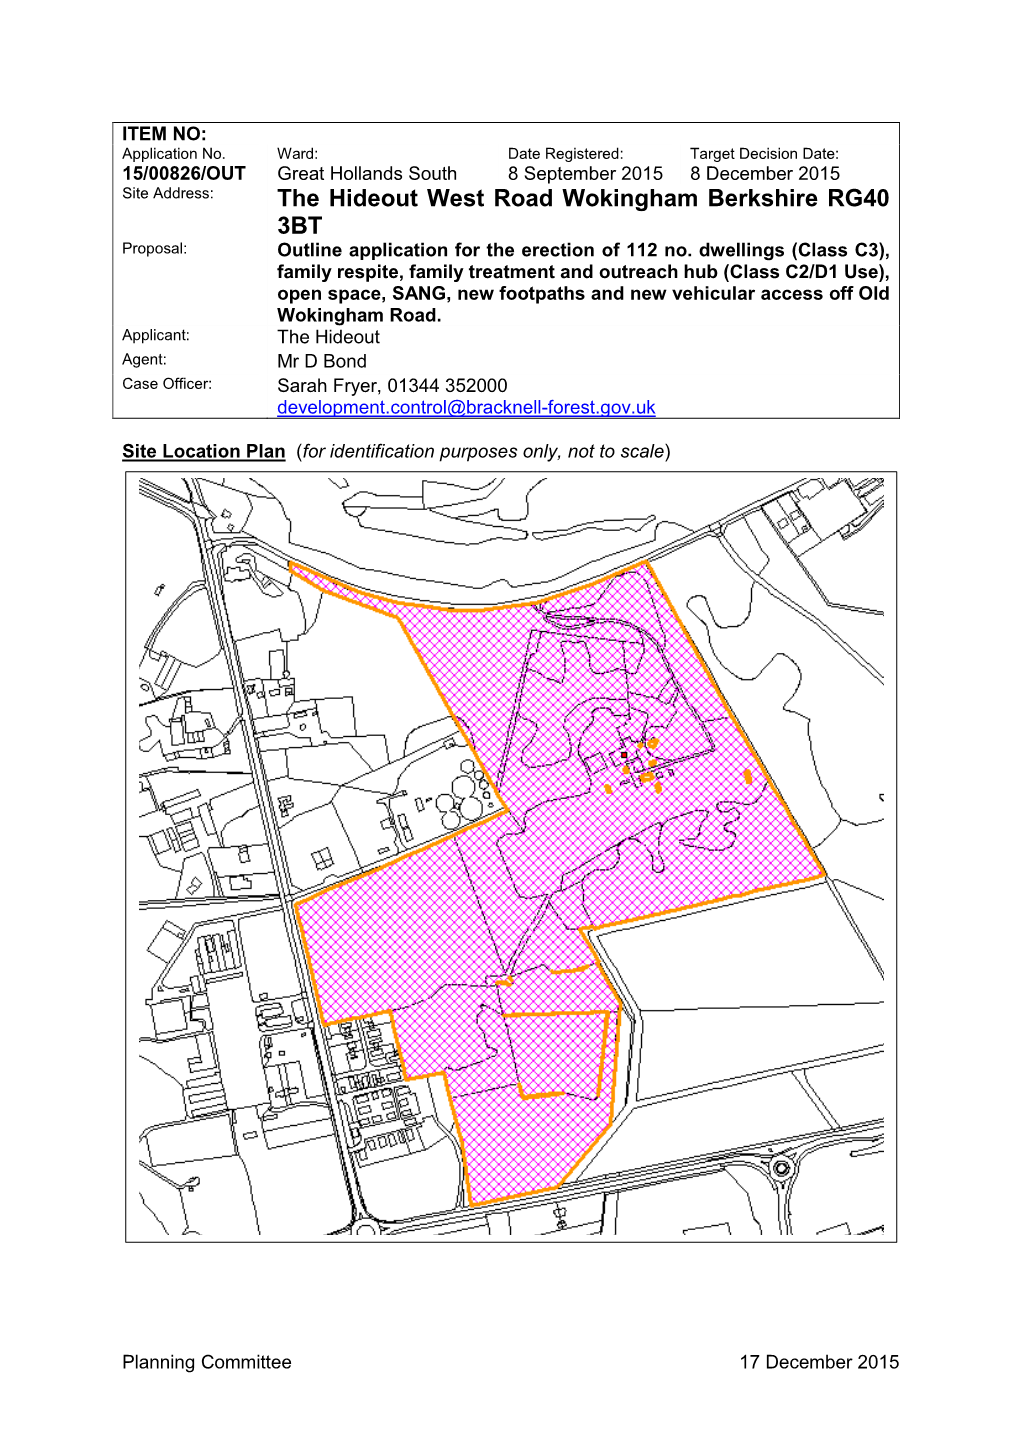 The Hideout West Road Wokingham Berkshire RG40 3BT Proposal: Outline Application for the Erection of 112 No